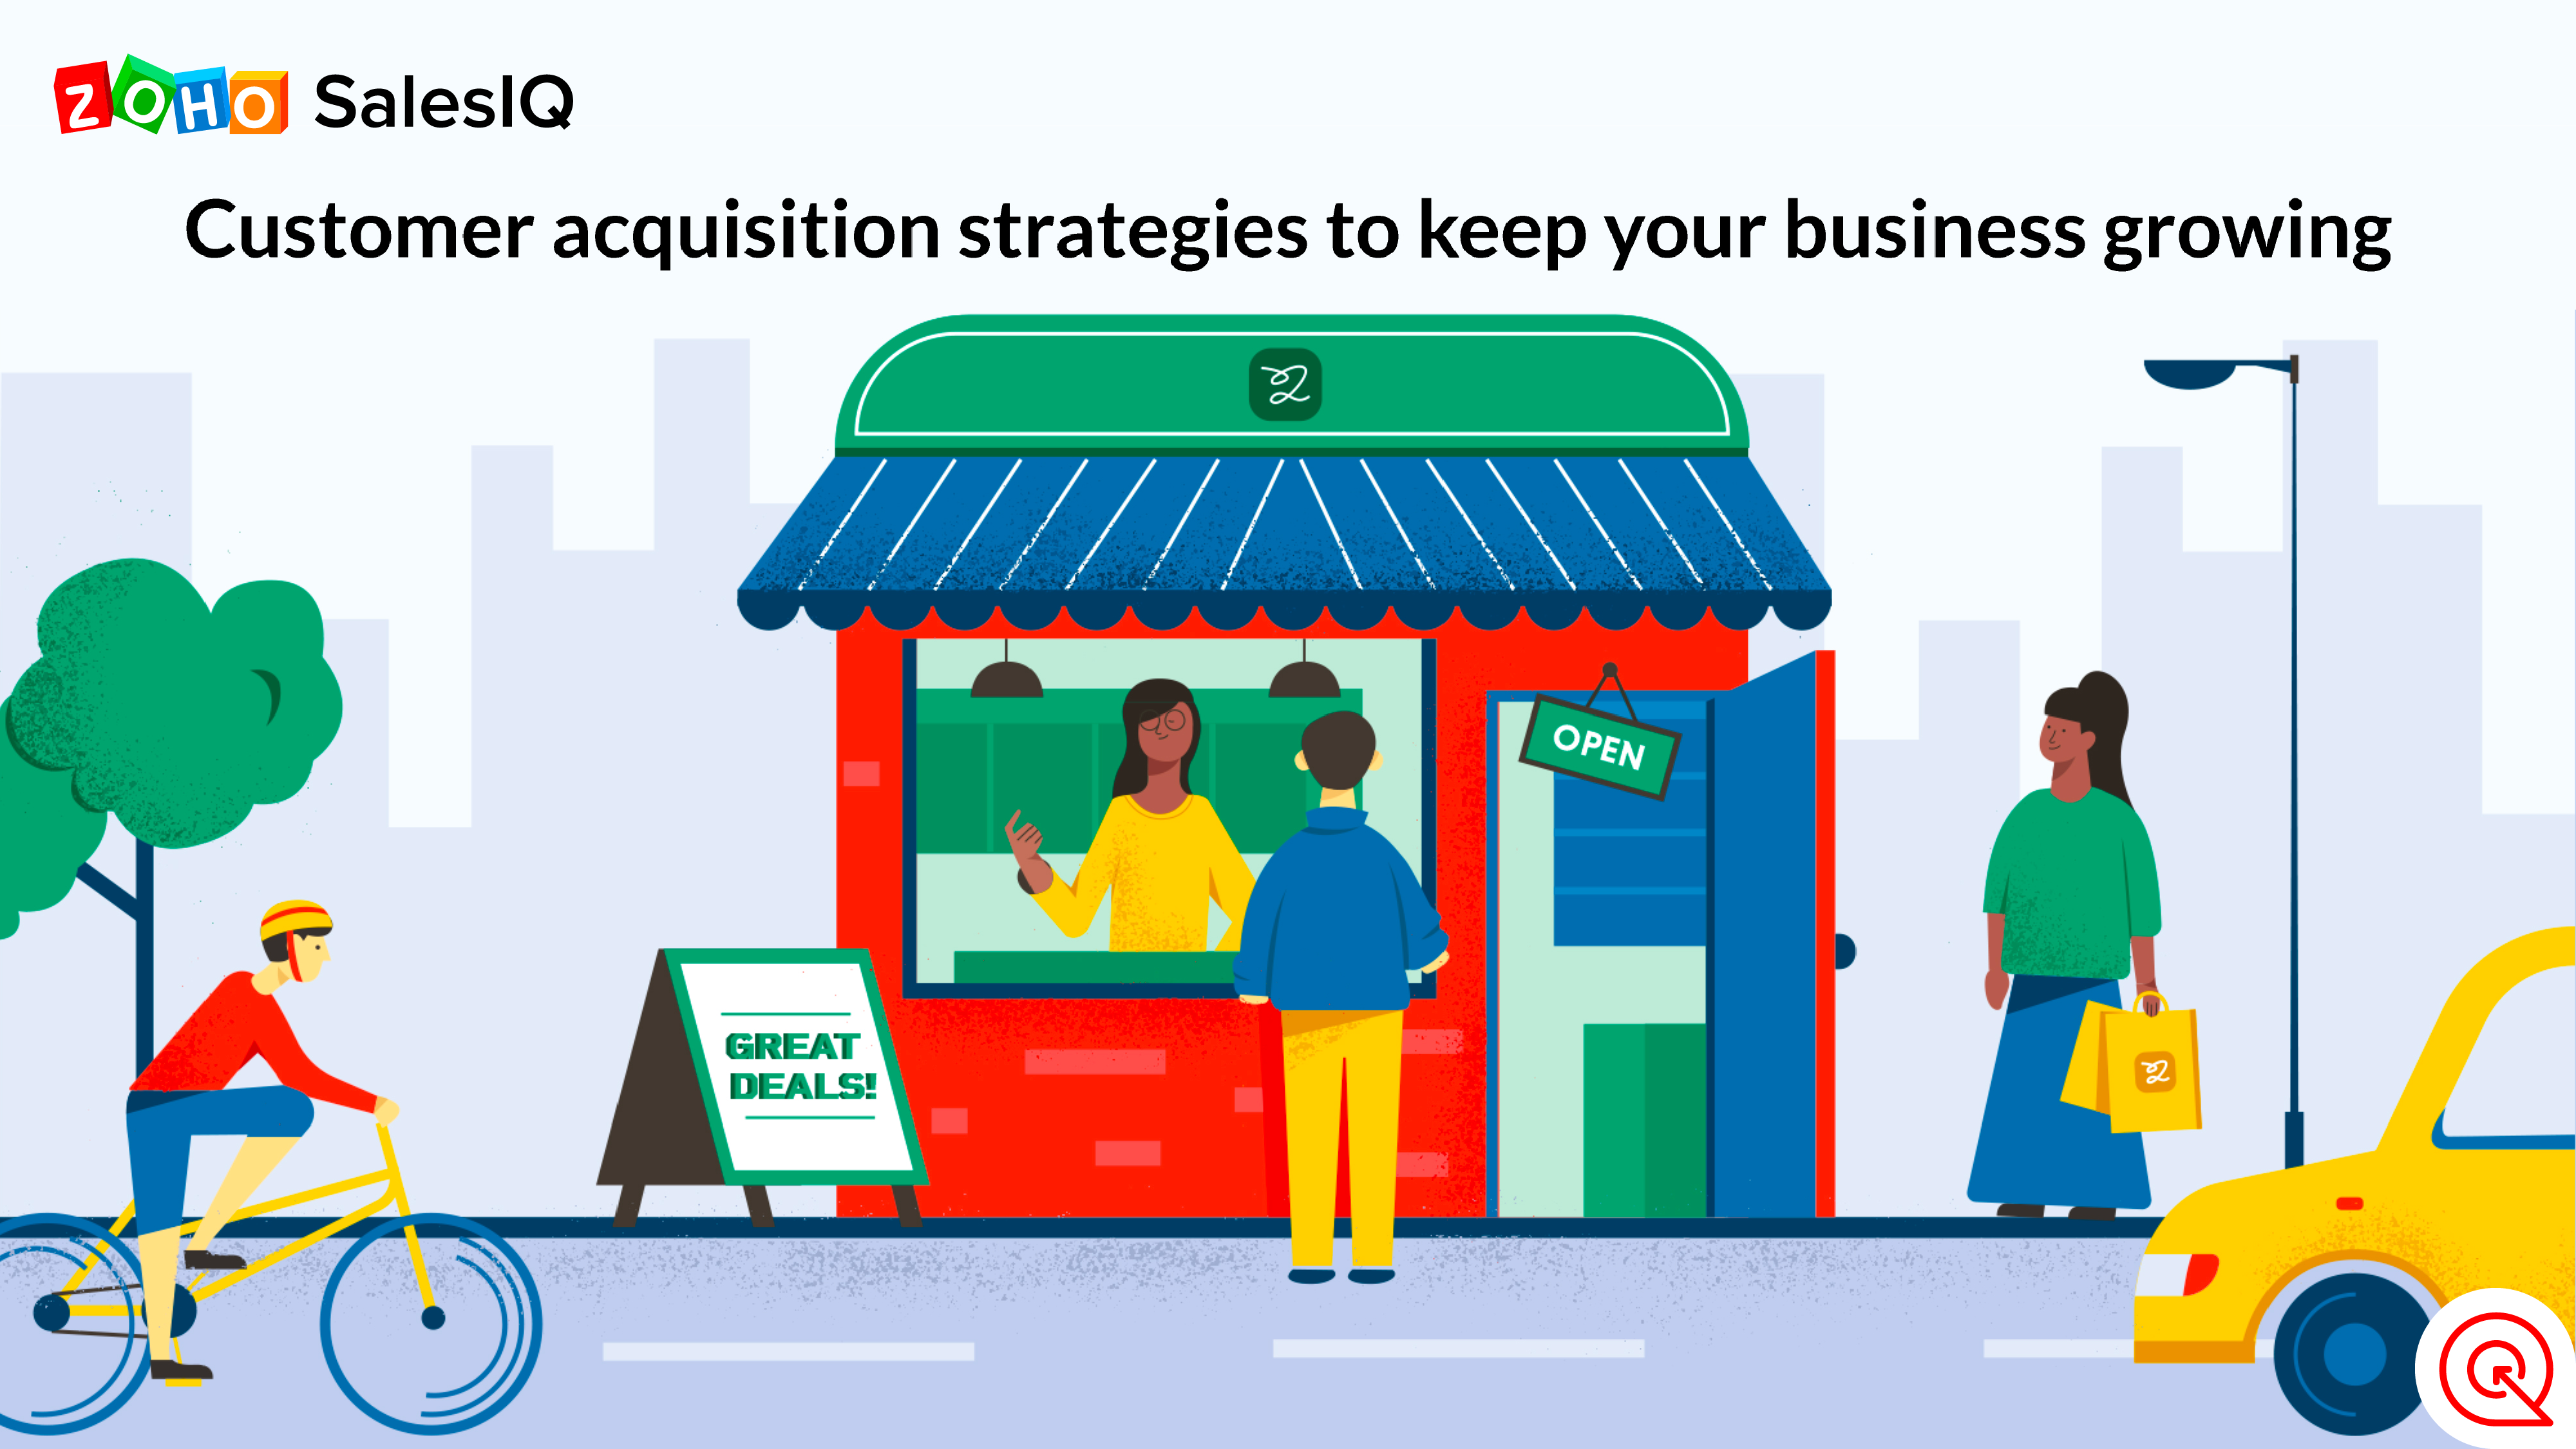 A complete guide to customer acquisition strategies - Zoho Blog